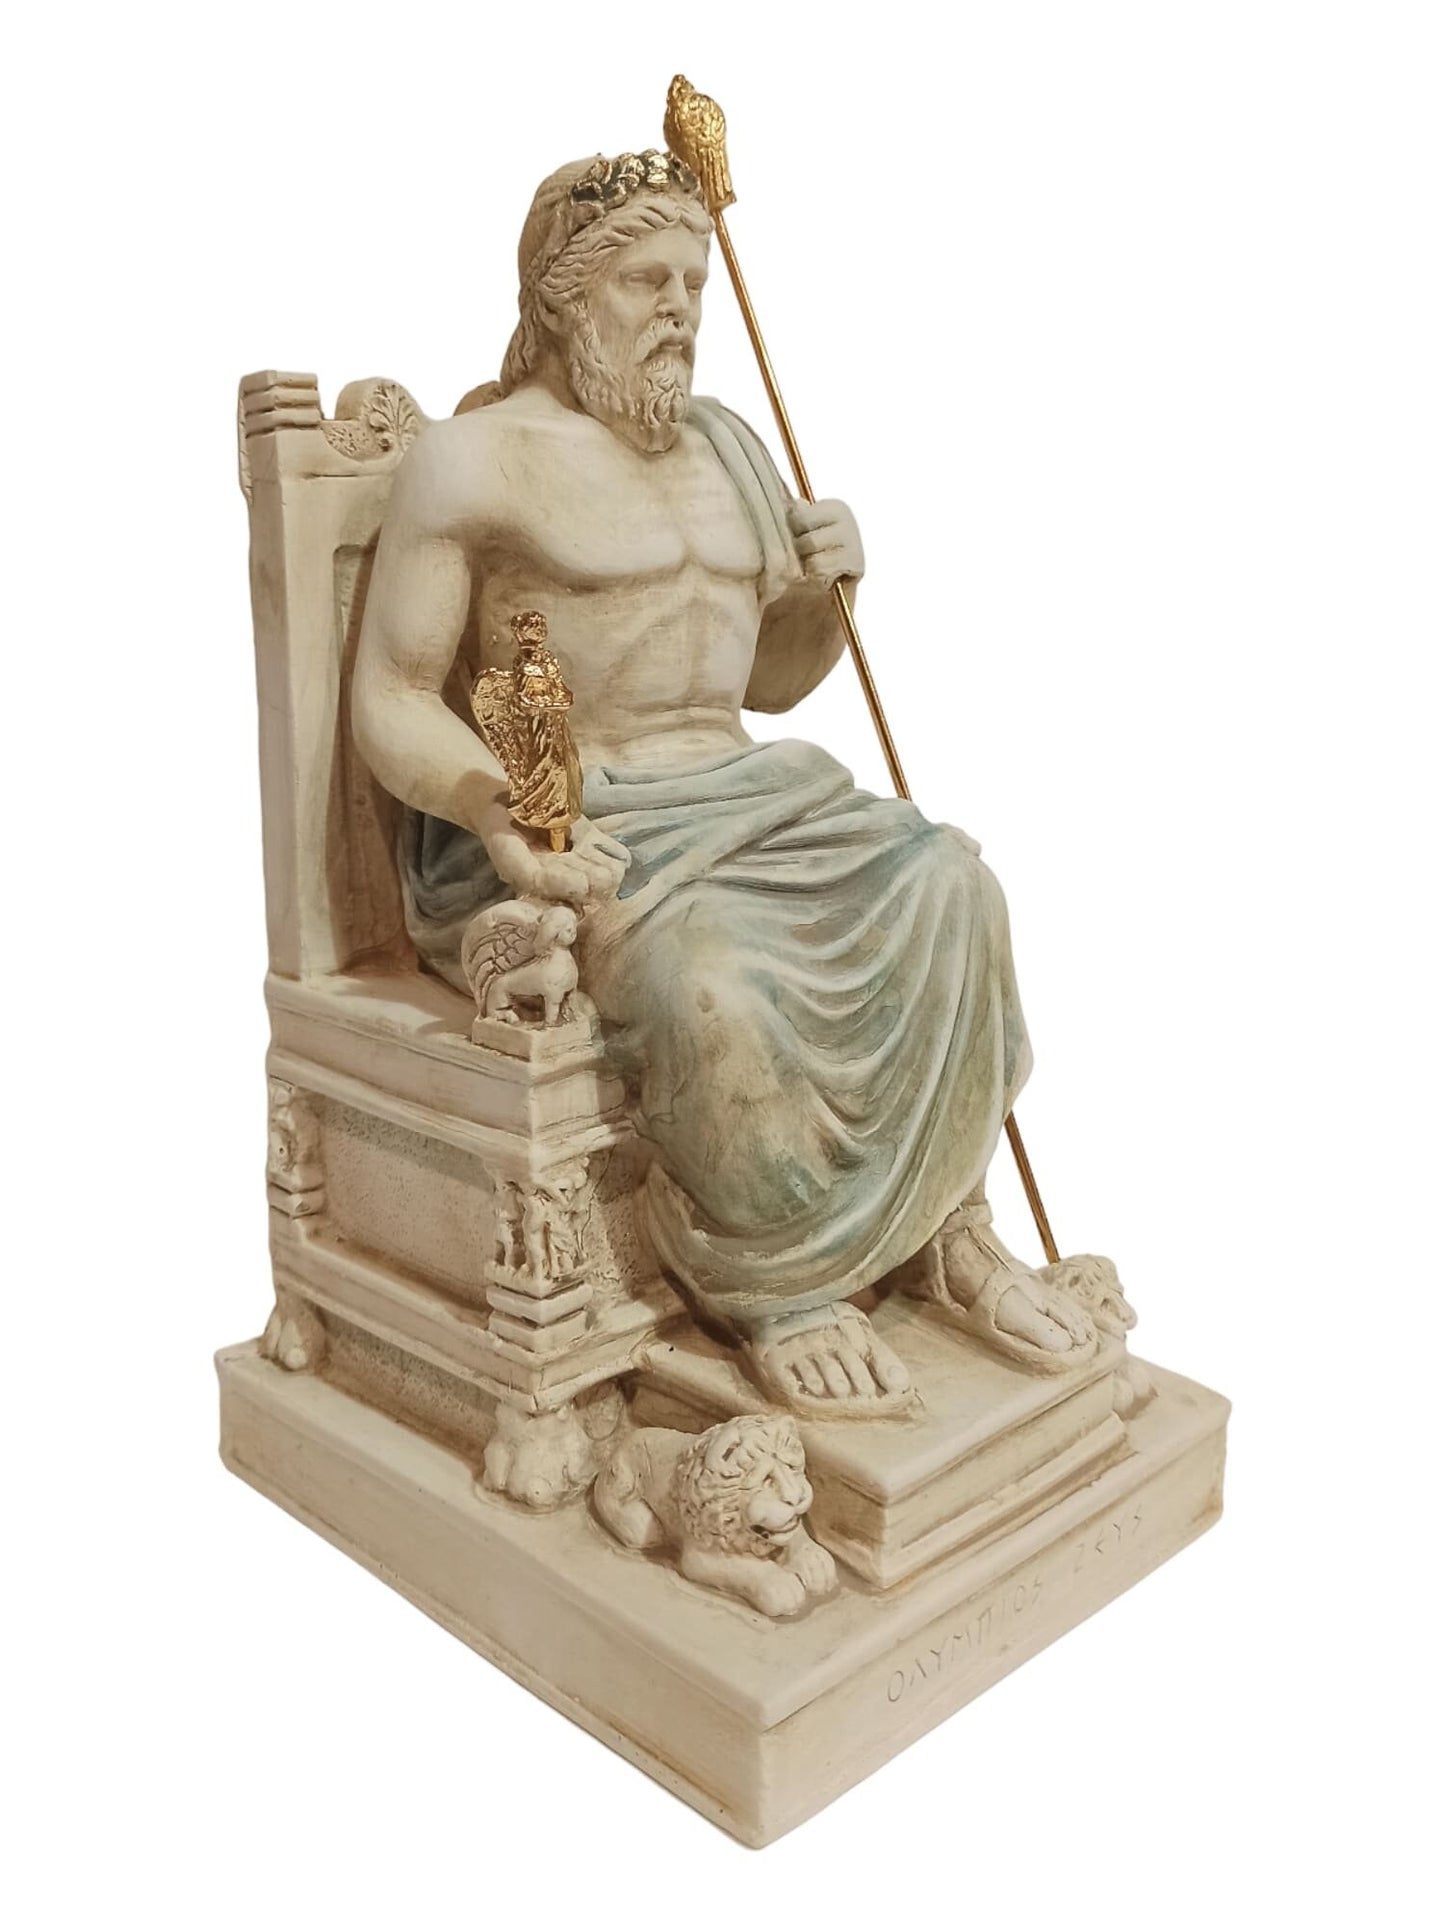 Zeus Jupiter - Greek Roman God of the Sky, Law and Order, Destiny and Fate - King of the Gods of Mount Olympus - Casting Stone